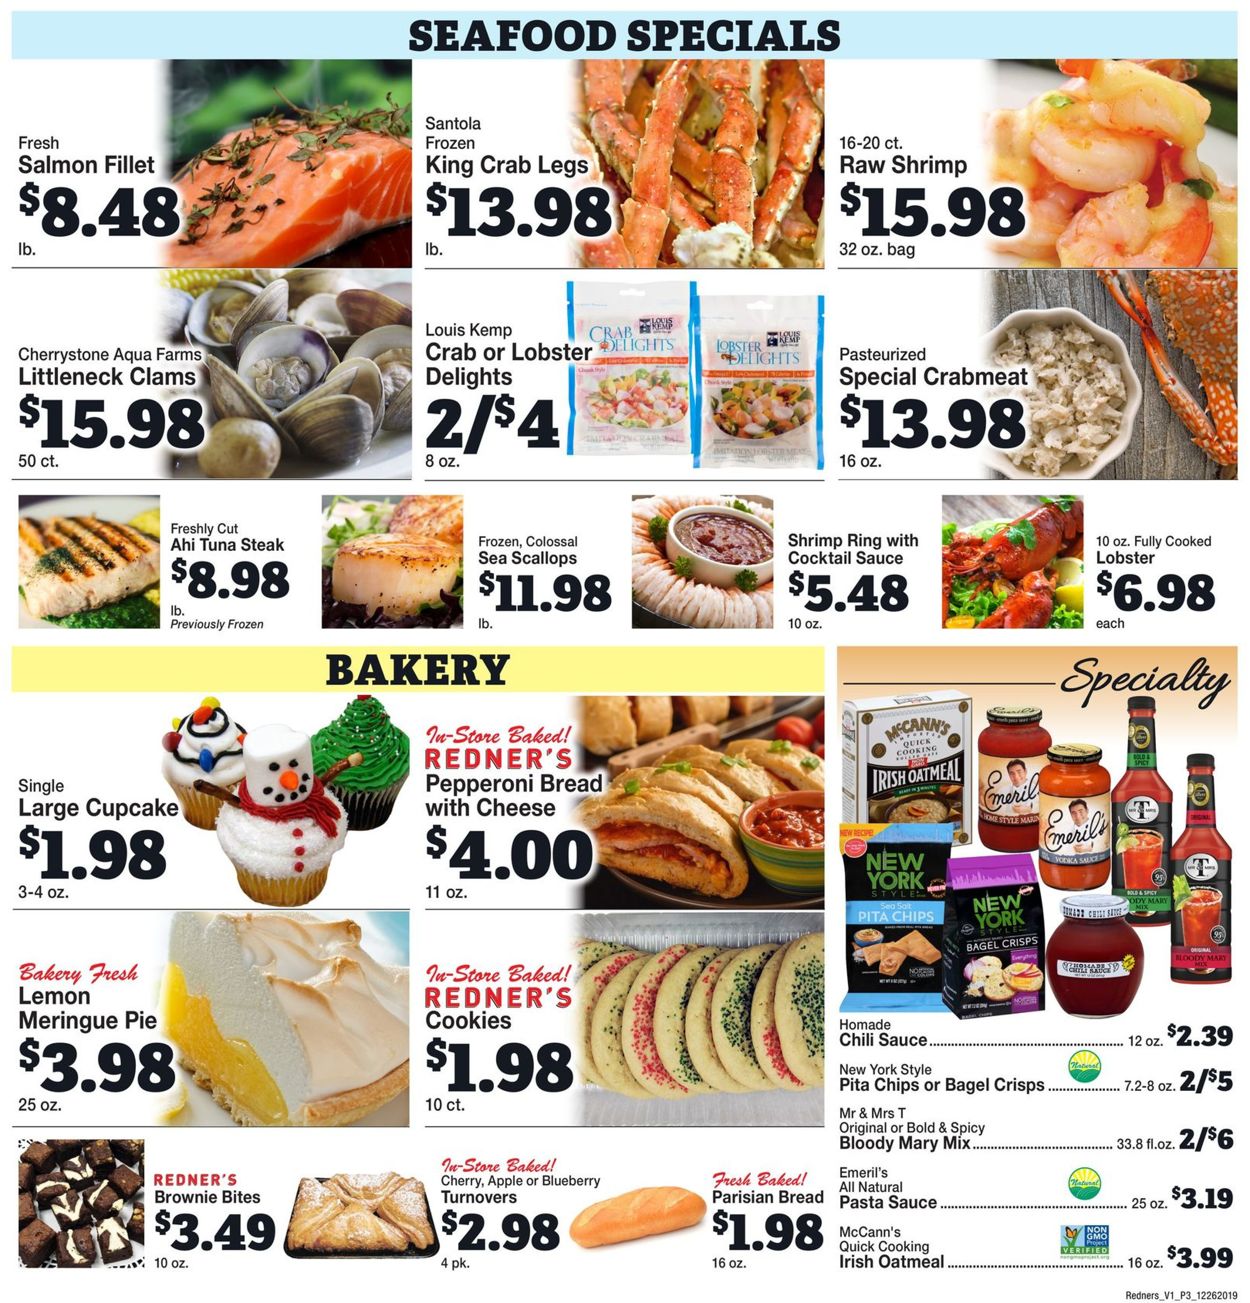 Redner’s Warehouse Market - New Year's Ad 2019/2020 Weekly Ad Circular - valid 12/26-01/01/2020 (Page 5)